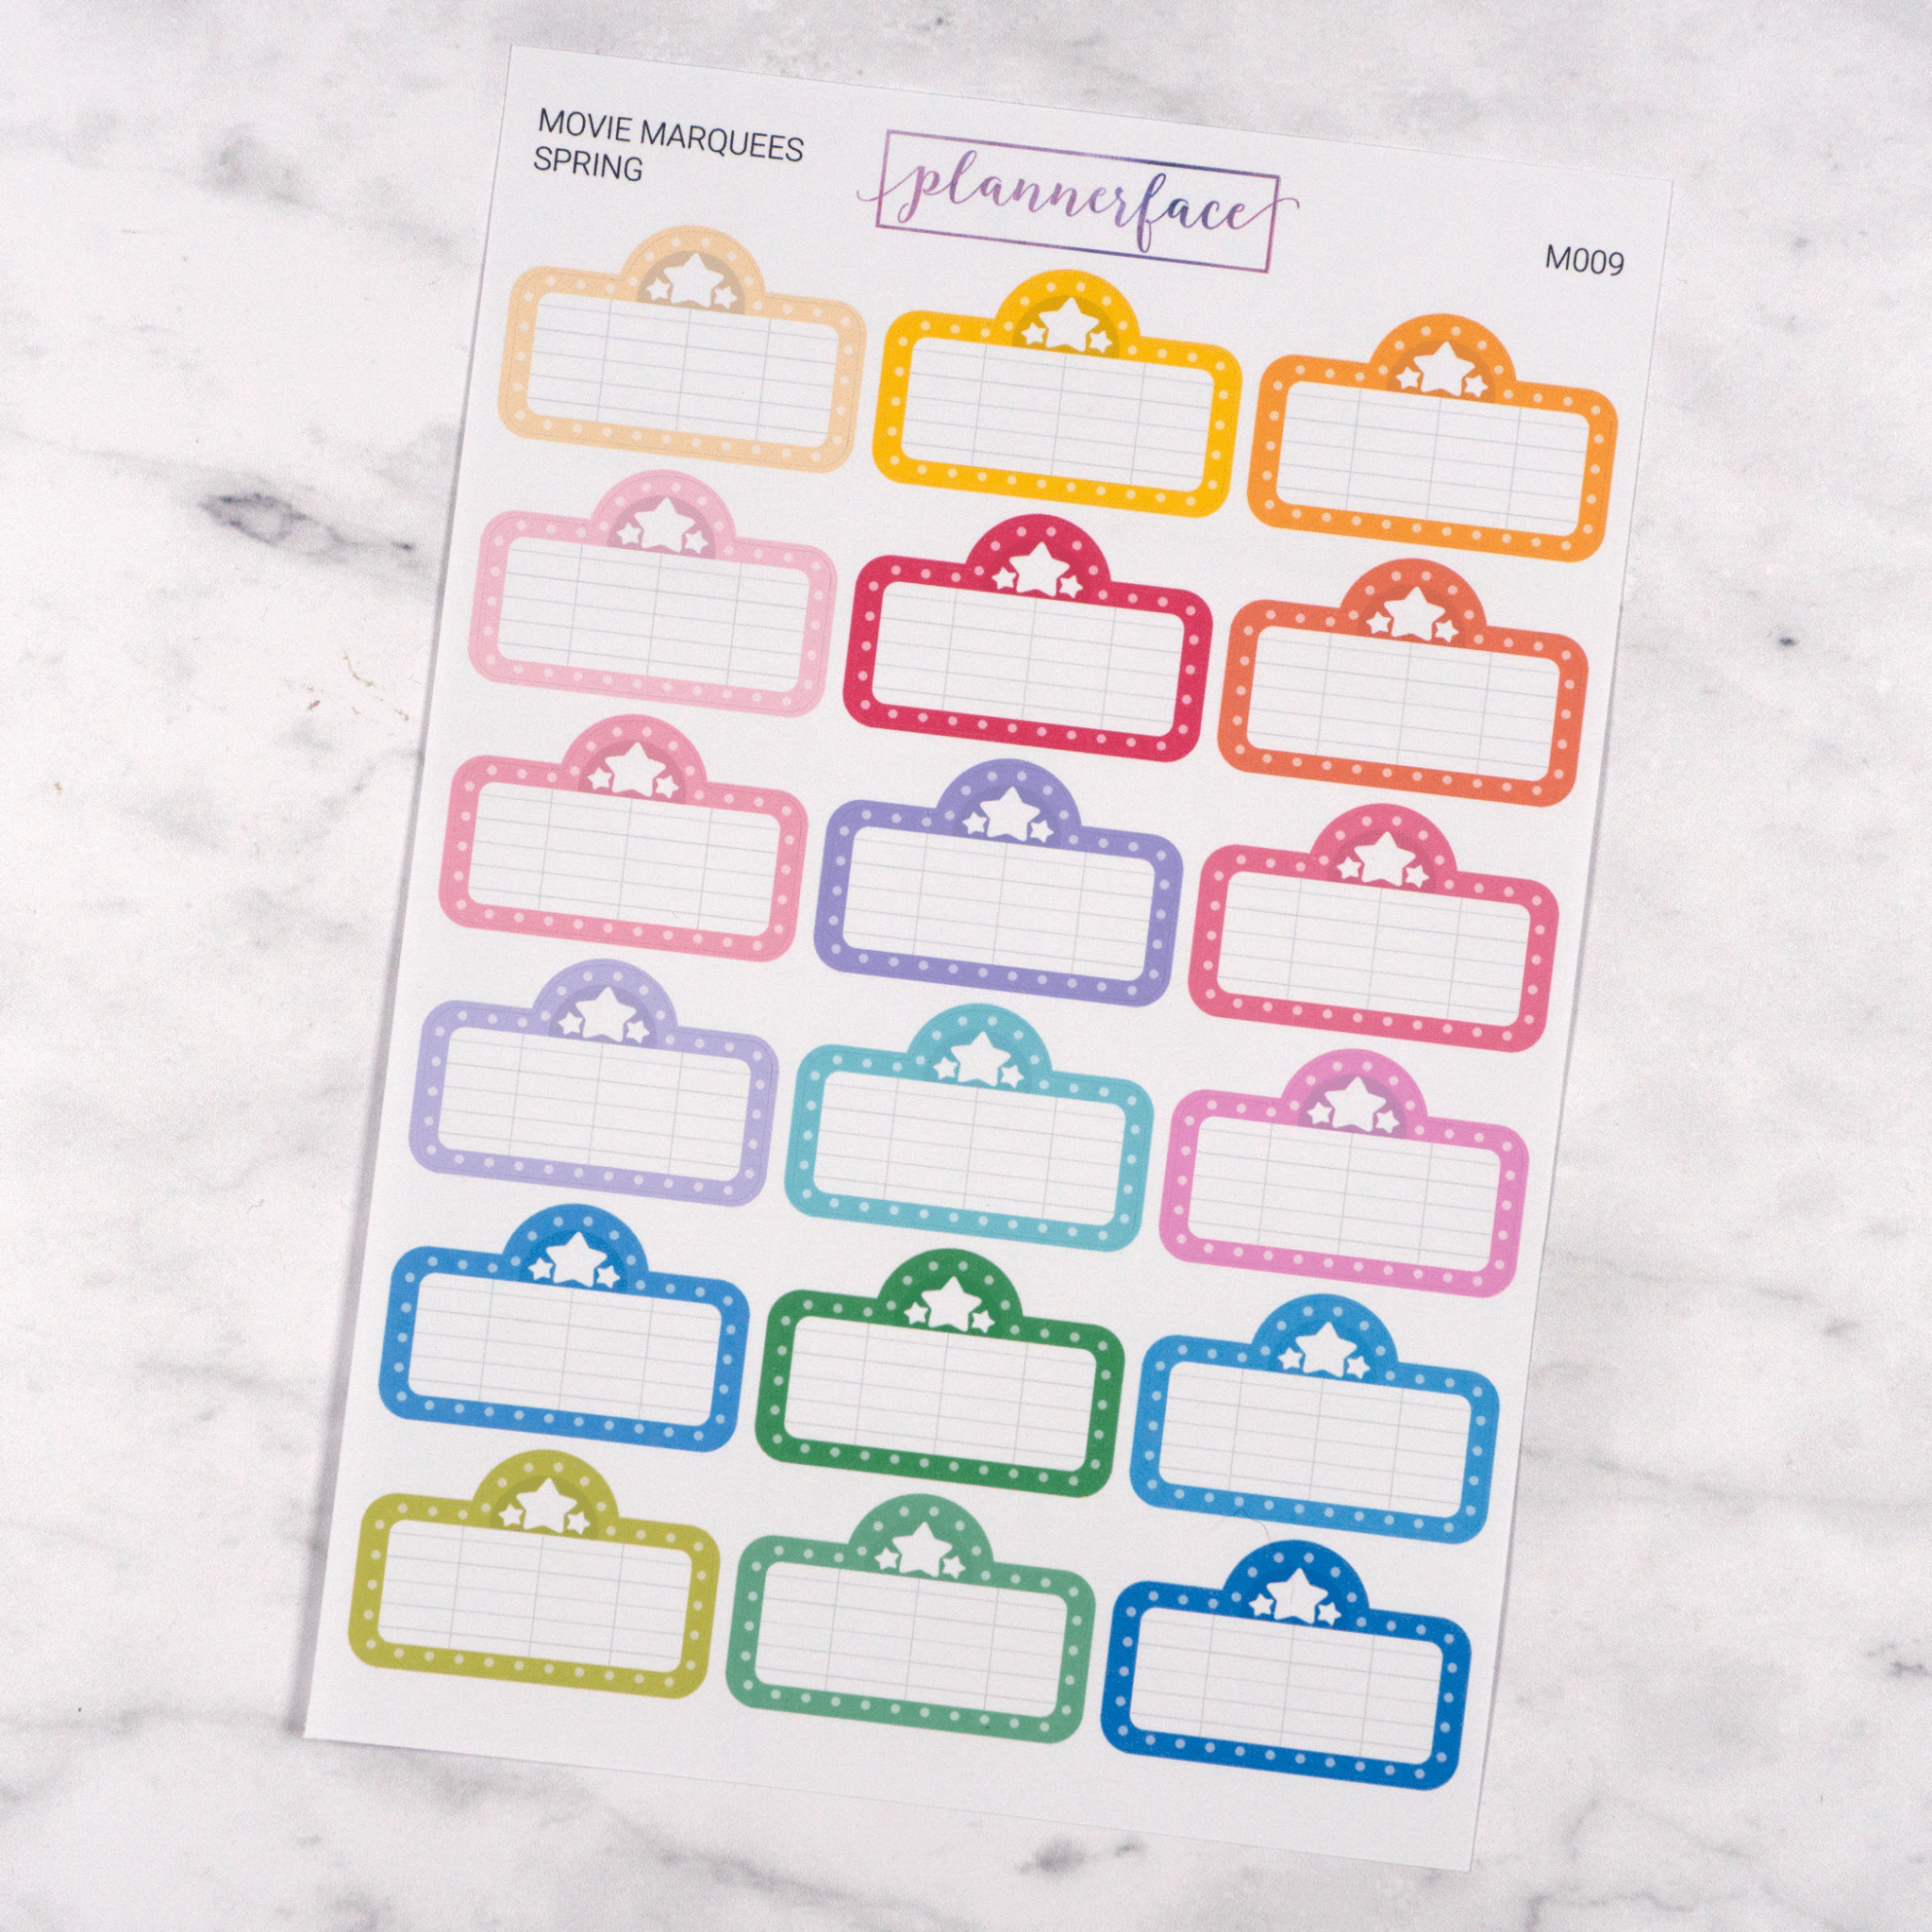 Movie Marquees | Spring Multicolour by Plannerface